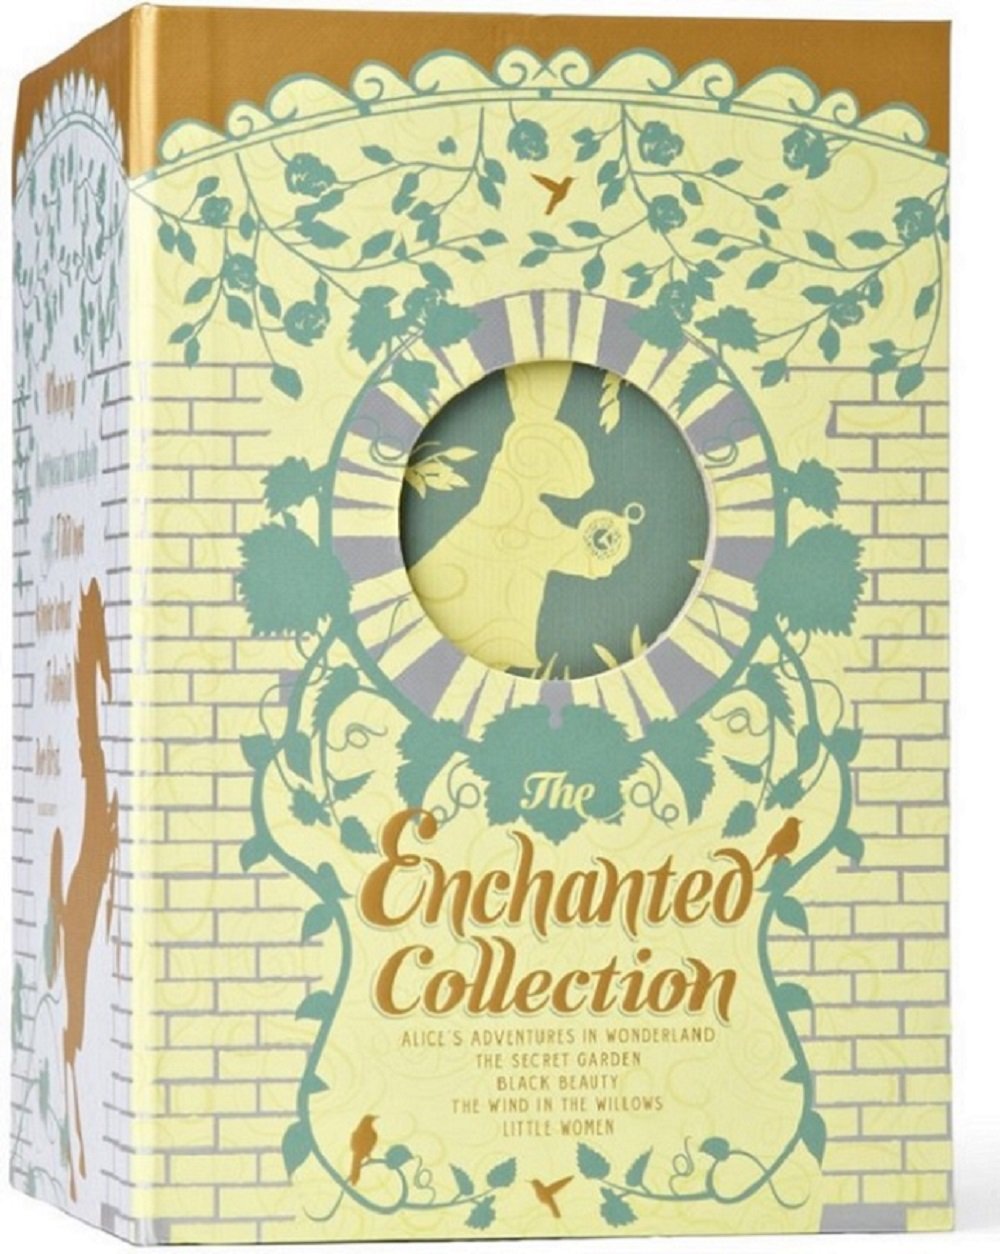 The Enchanted Collection: Alice's Adventures in Wonderland, The Secret Garden, Black Beauty, The Wind in the Willows, Little Women (The Heirloo...